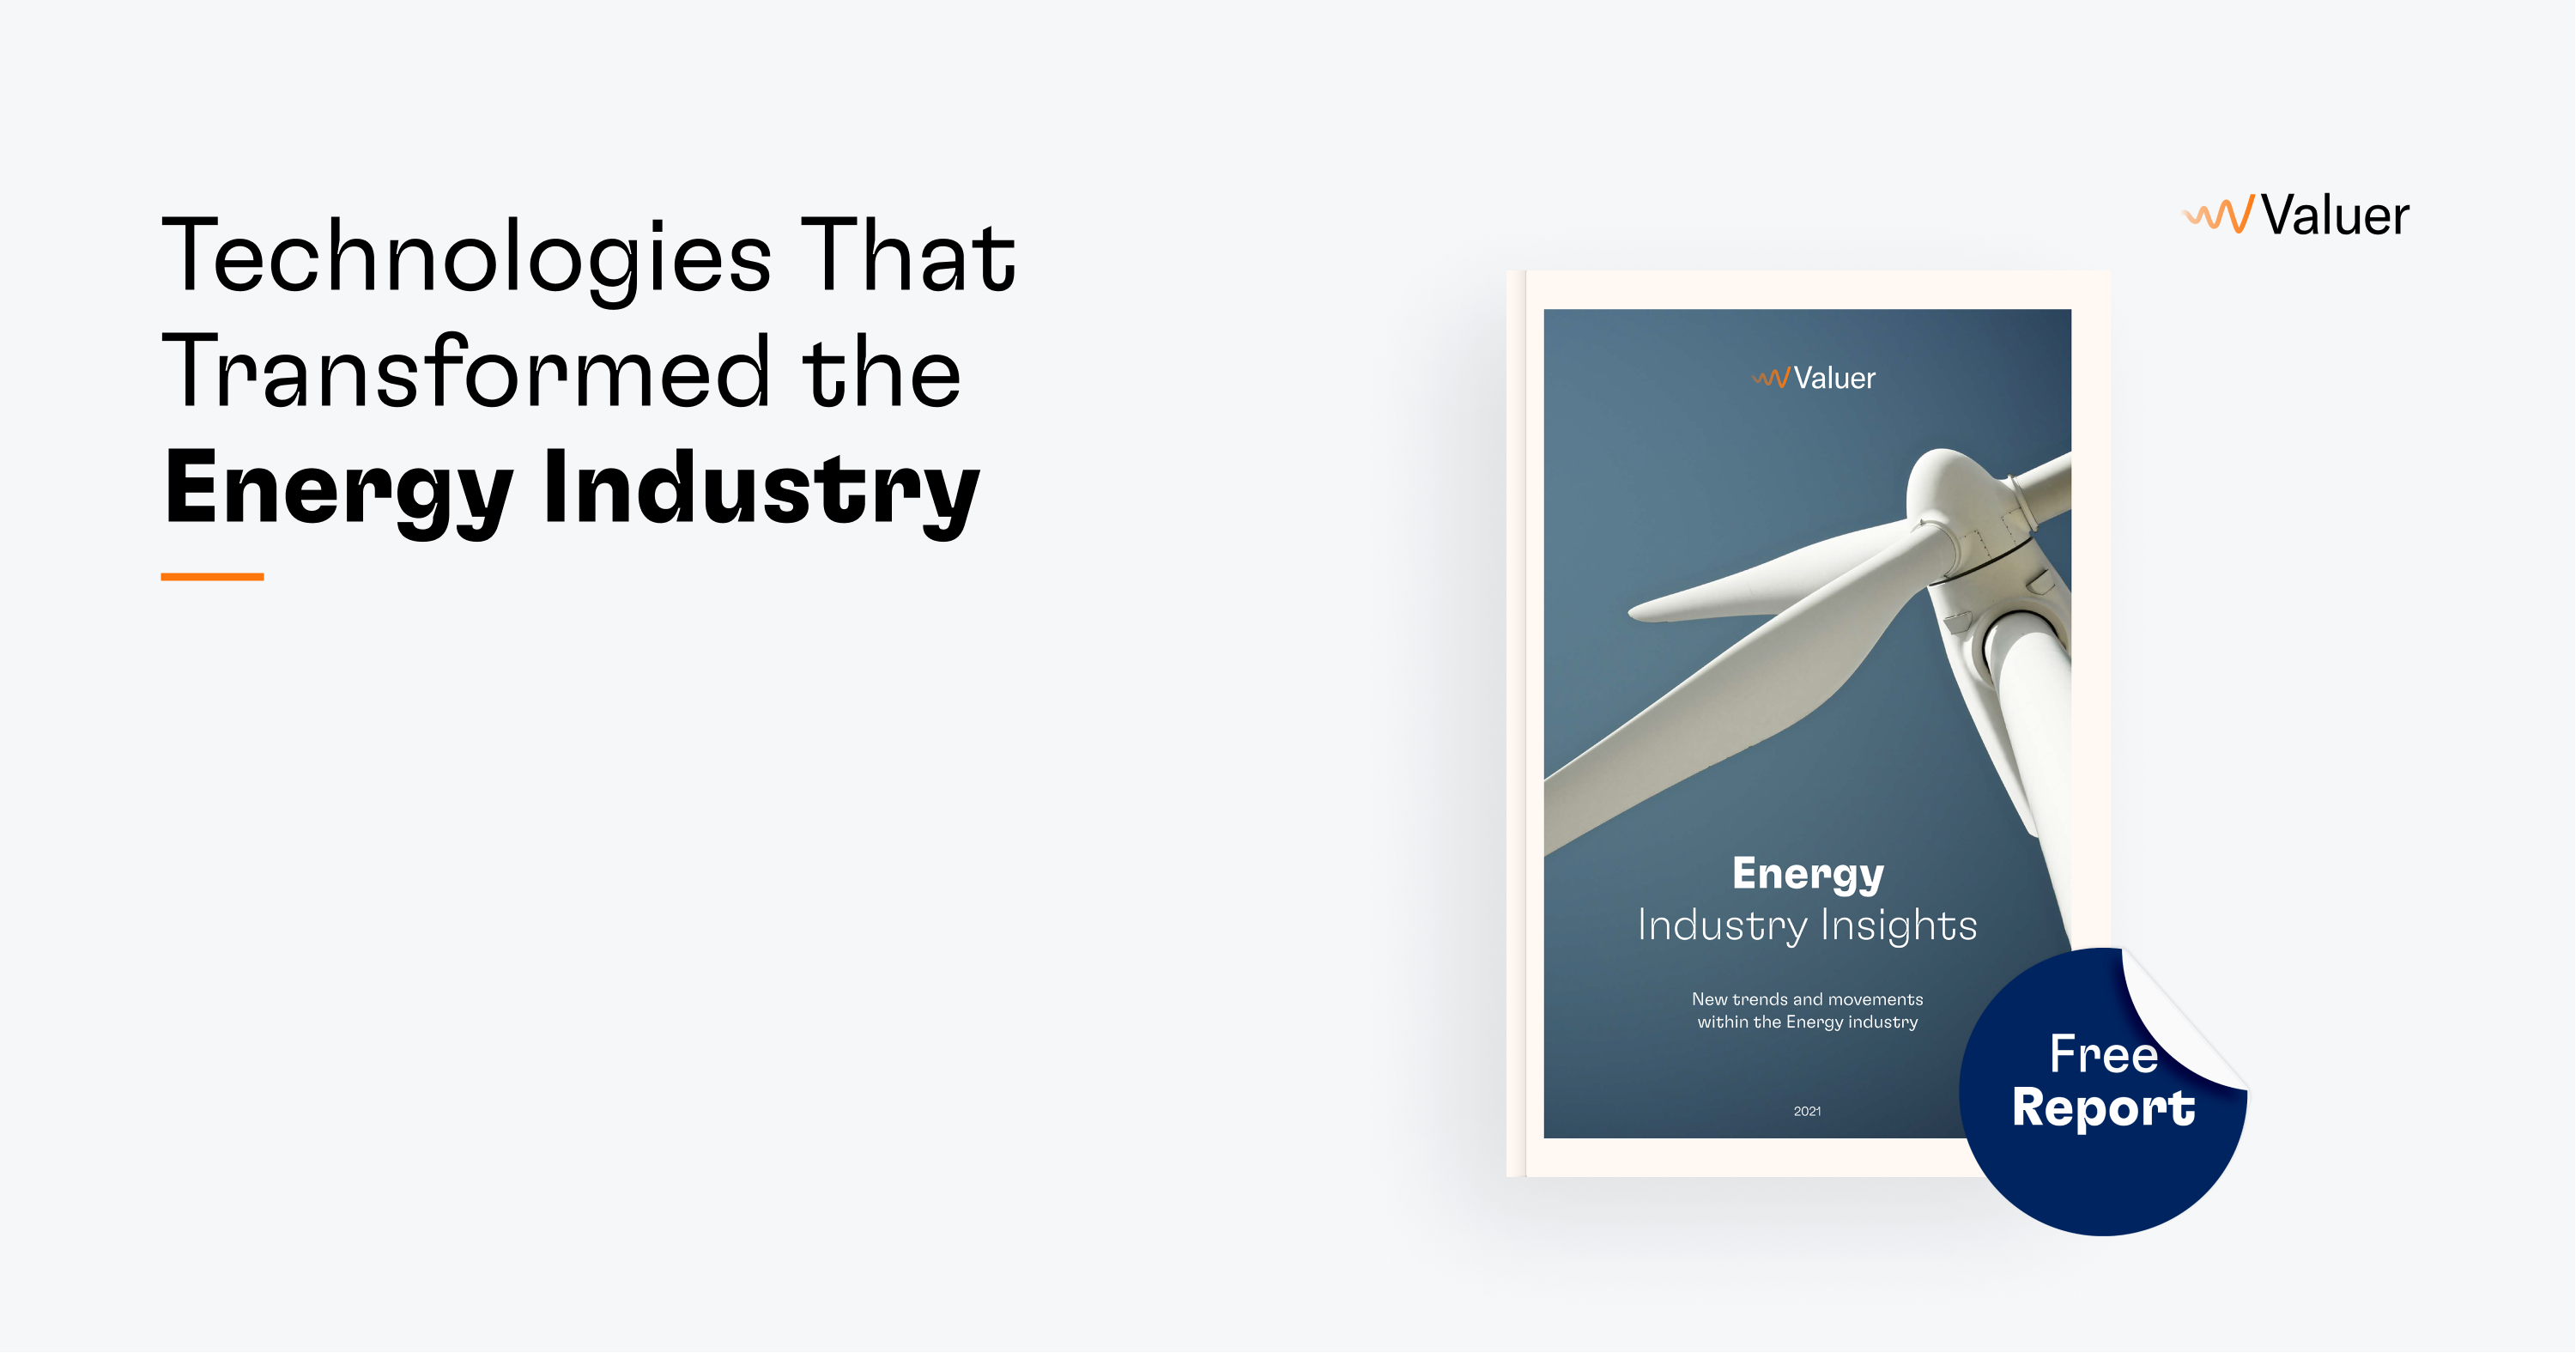 Technologies That Transformed the Energy Industry (free report)